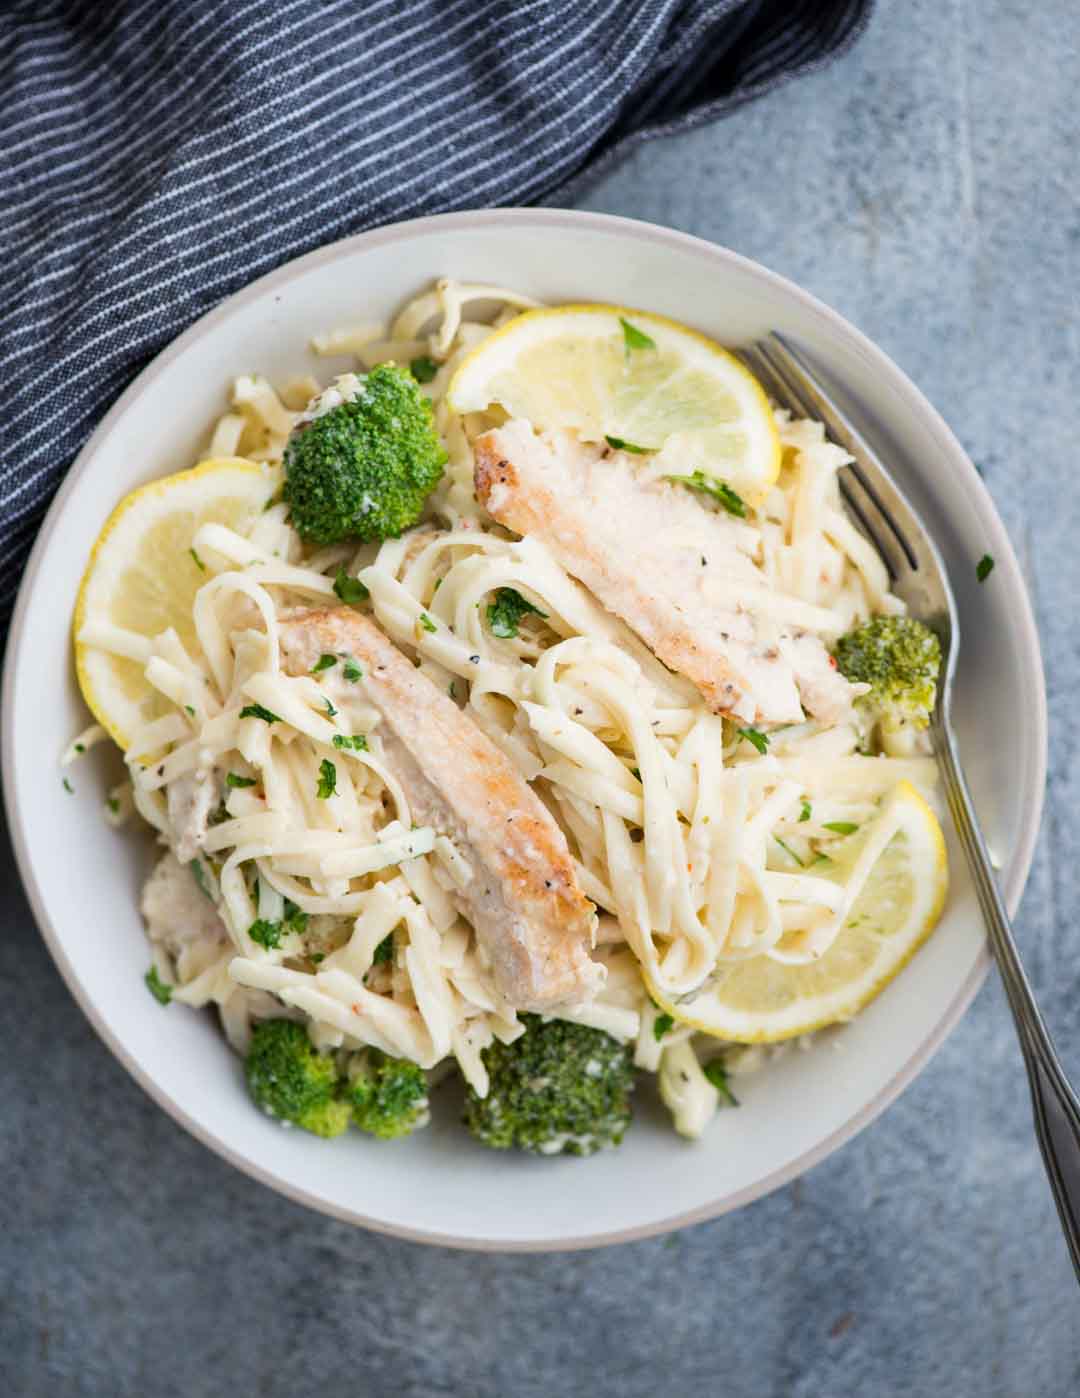 Chicken Broccoli Pasta with incredibly creamy lemon parmesan sauce is light and refreshing. A filling dinner ready in just 30 minutes.